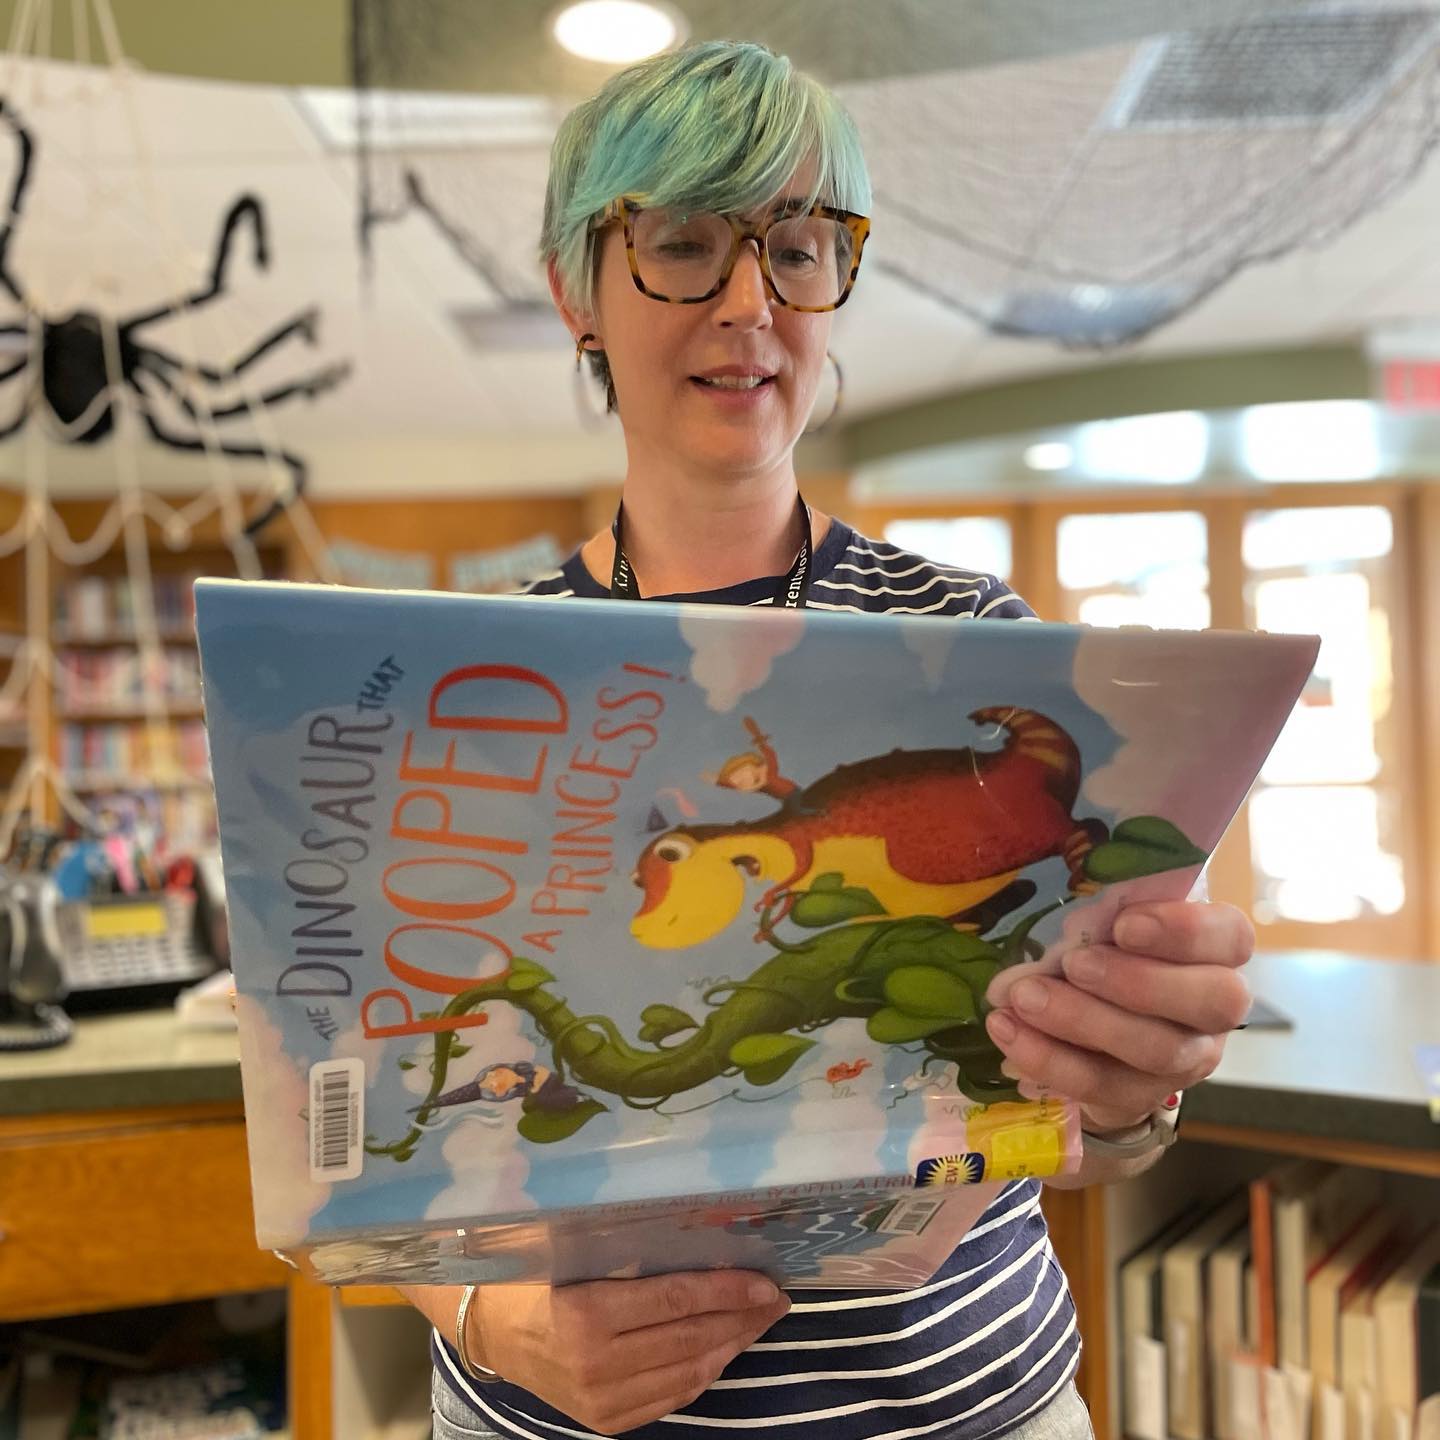 Clare’s back at it with staff story time! This week her pick to read at the front desk was “The Dinosaur that Pooped a Princess.” Are you sensing a theme in her selections? #bplmo #brentwoodlibrarymo #staffpics #staffstorytime #shereadssidewaystoo #dinosaurthatpoopedaprincess #newbooks #libraryfun